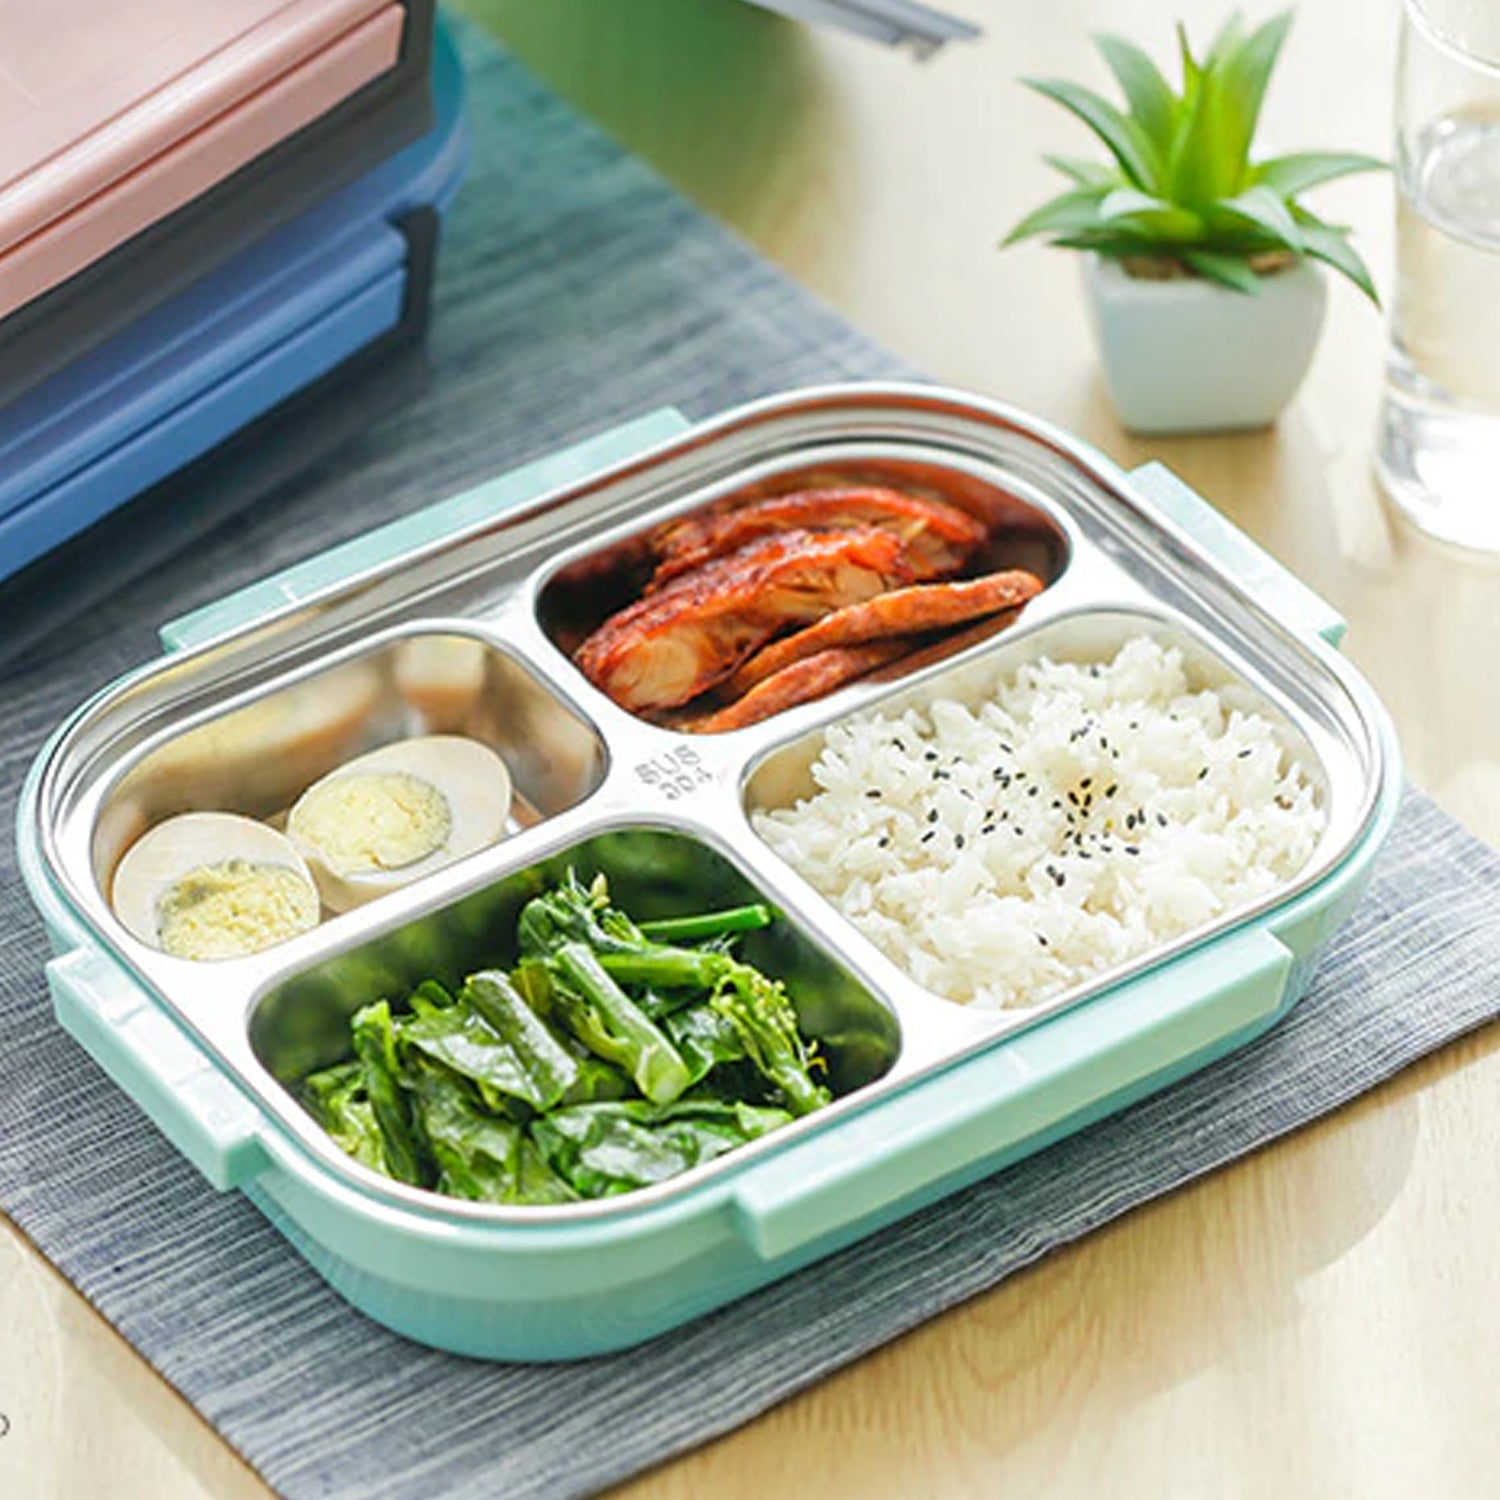 2043 White Transparent 4 Compartment Lunch Box for Kids and adults, Stainless Steel Lunch Box with 4 Compartments. DeoDap